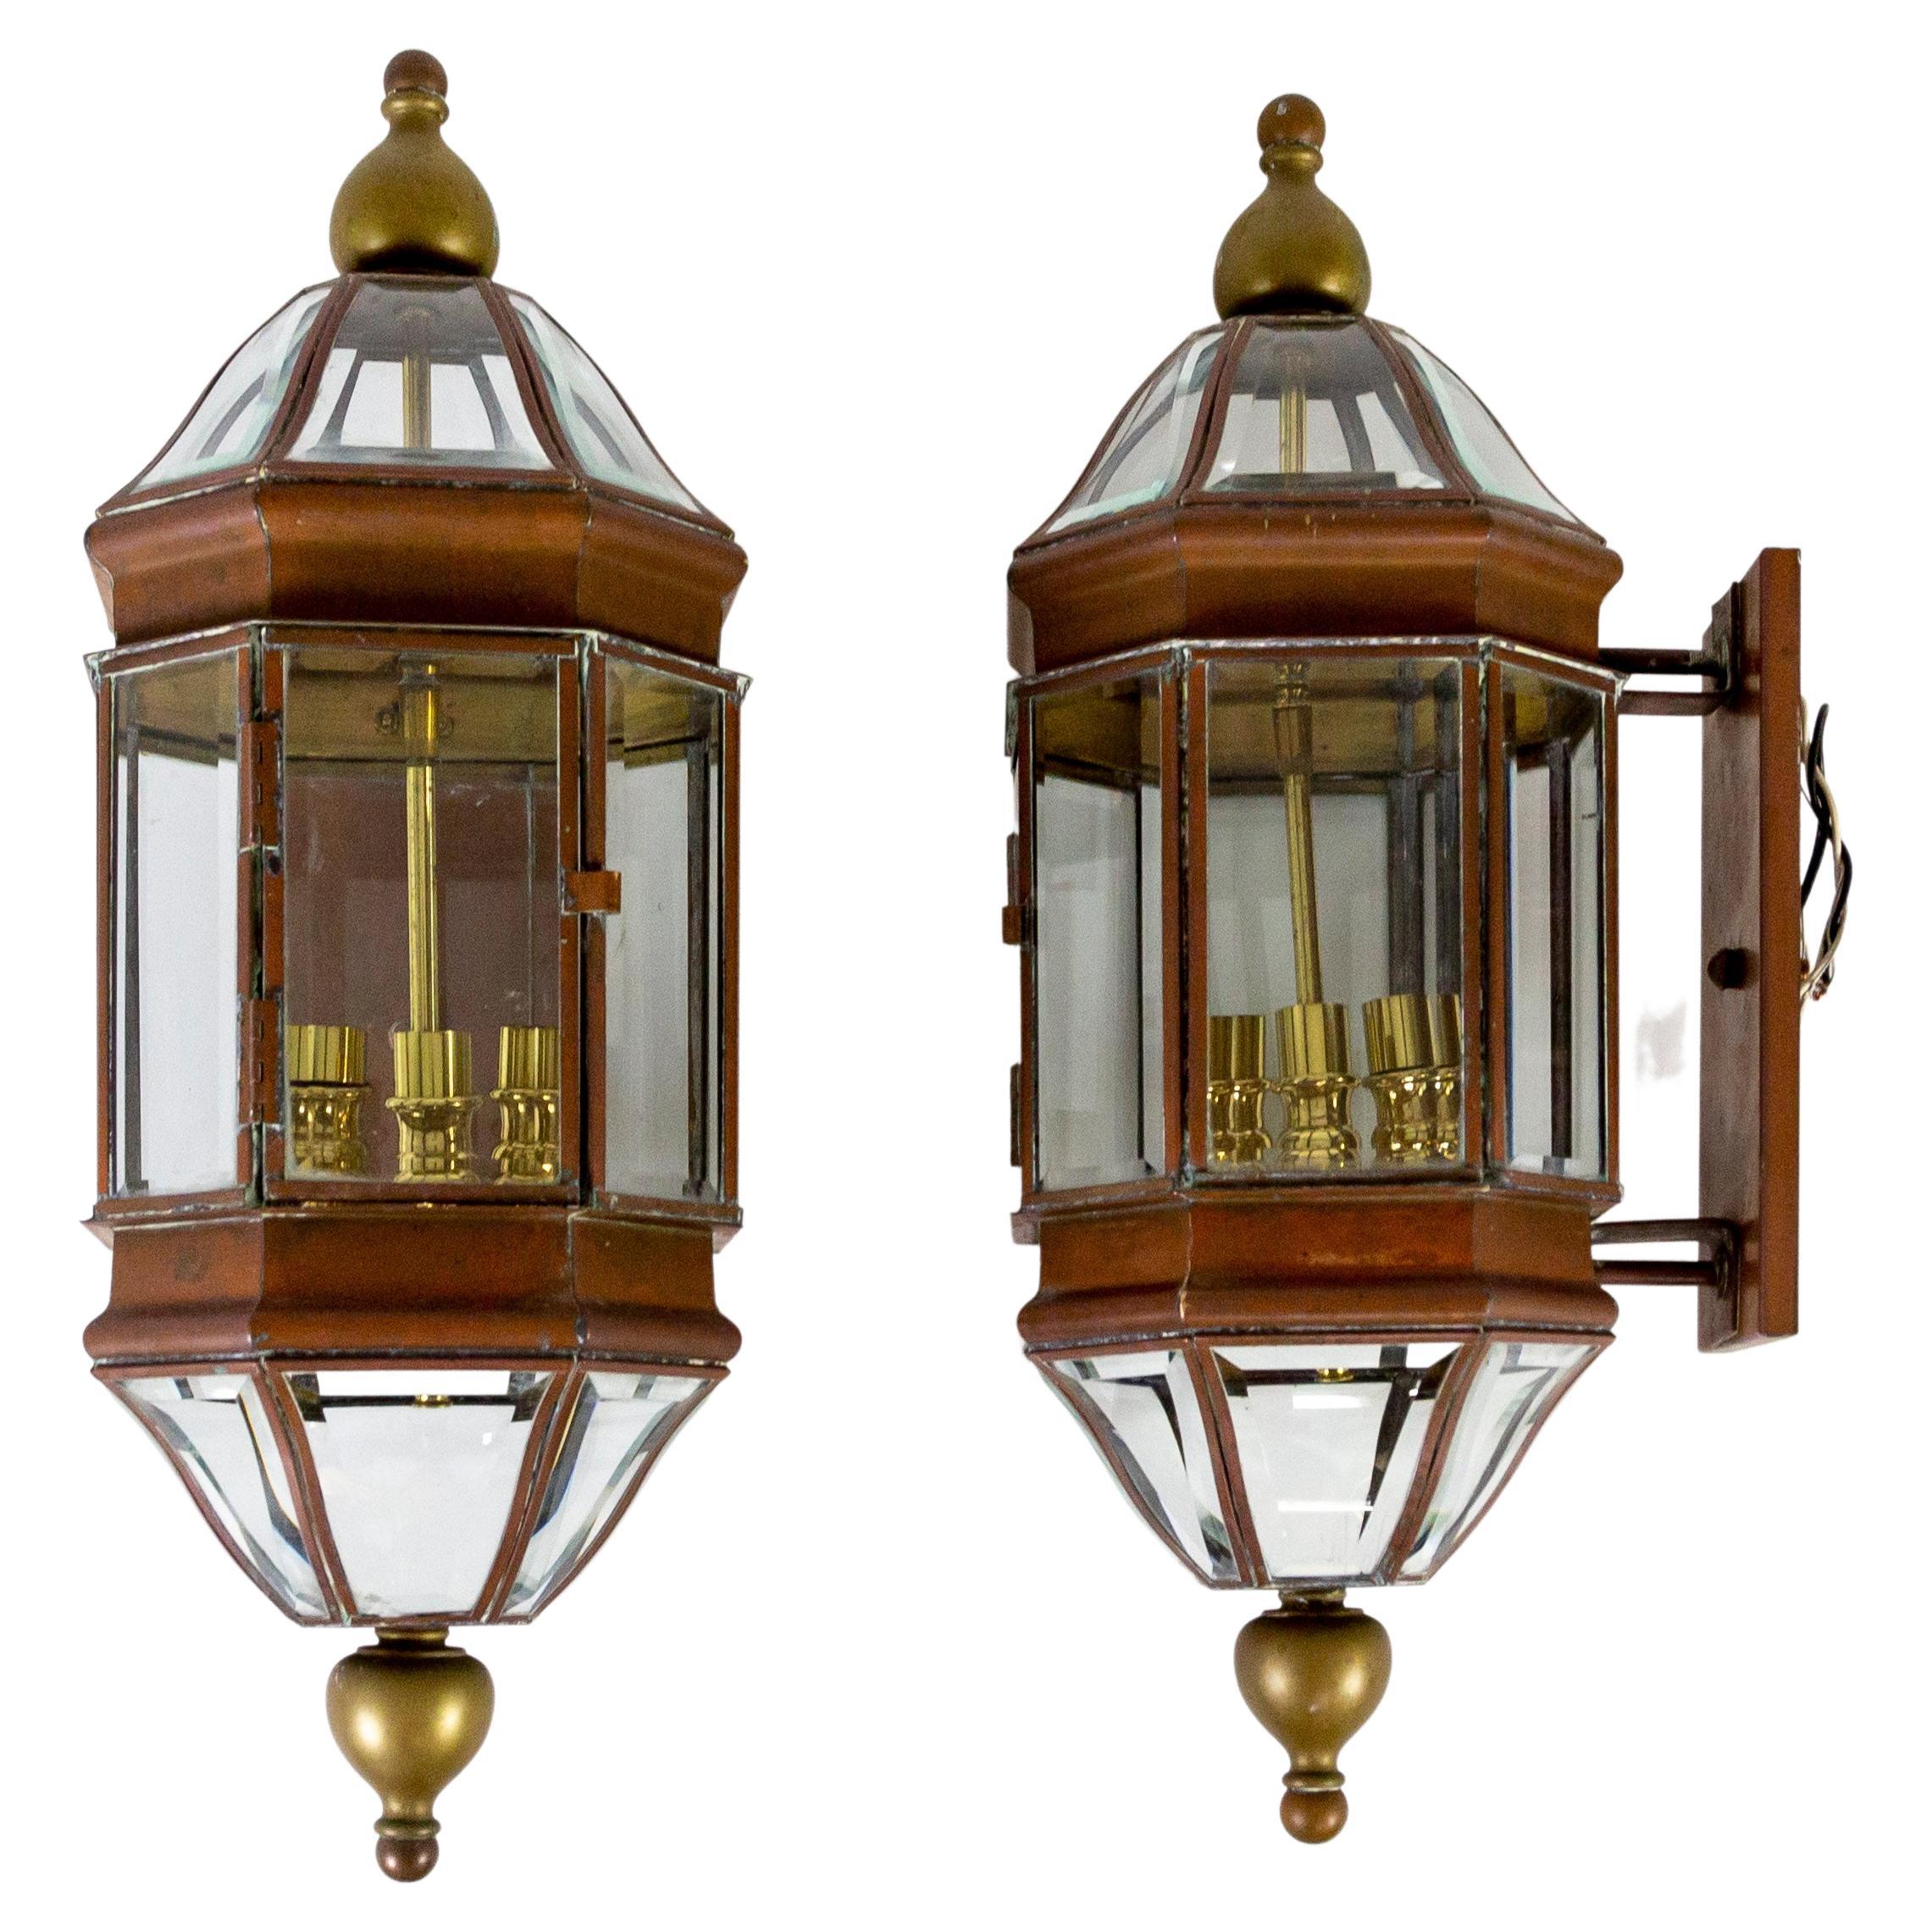 Large Handcrafted Copper, Brass & Beveled Glass Wall Lanterns, Pair